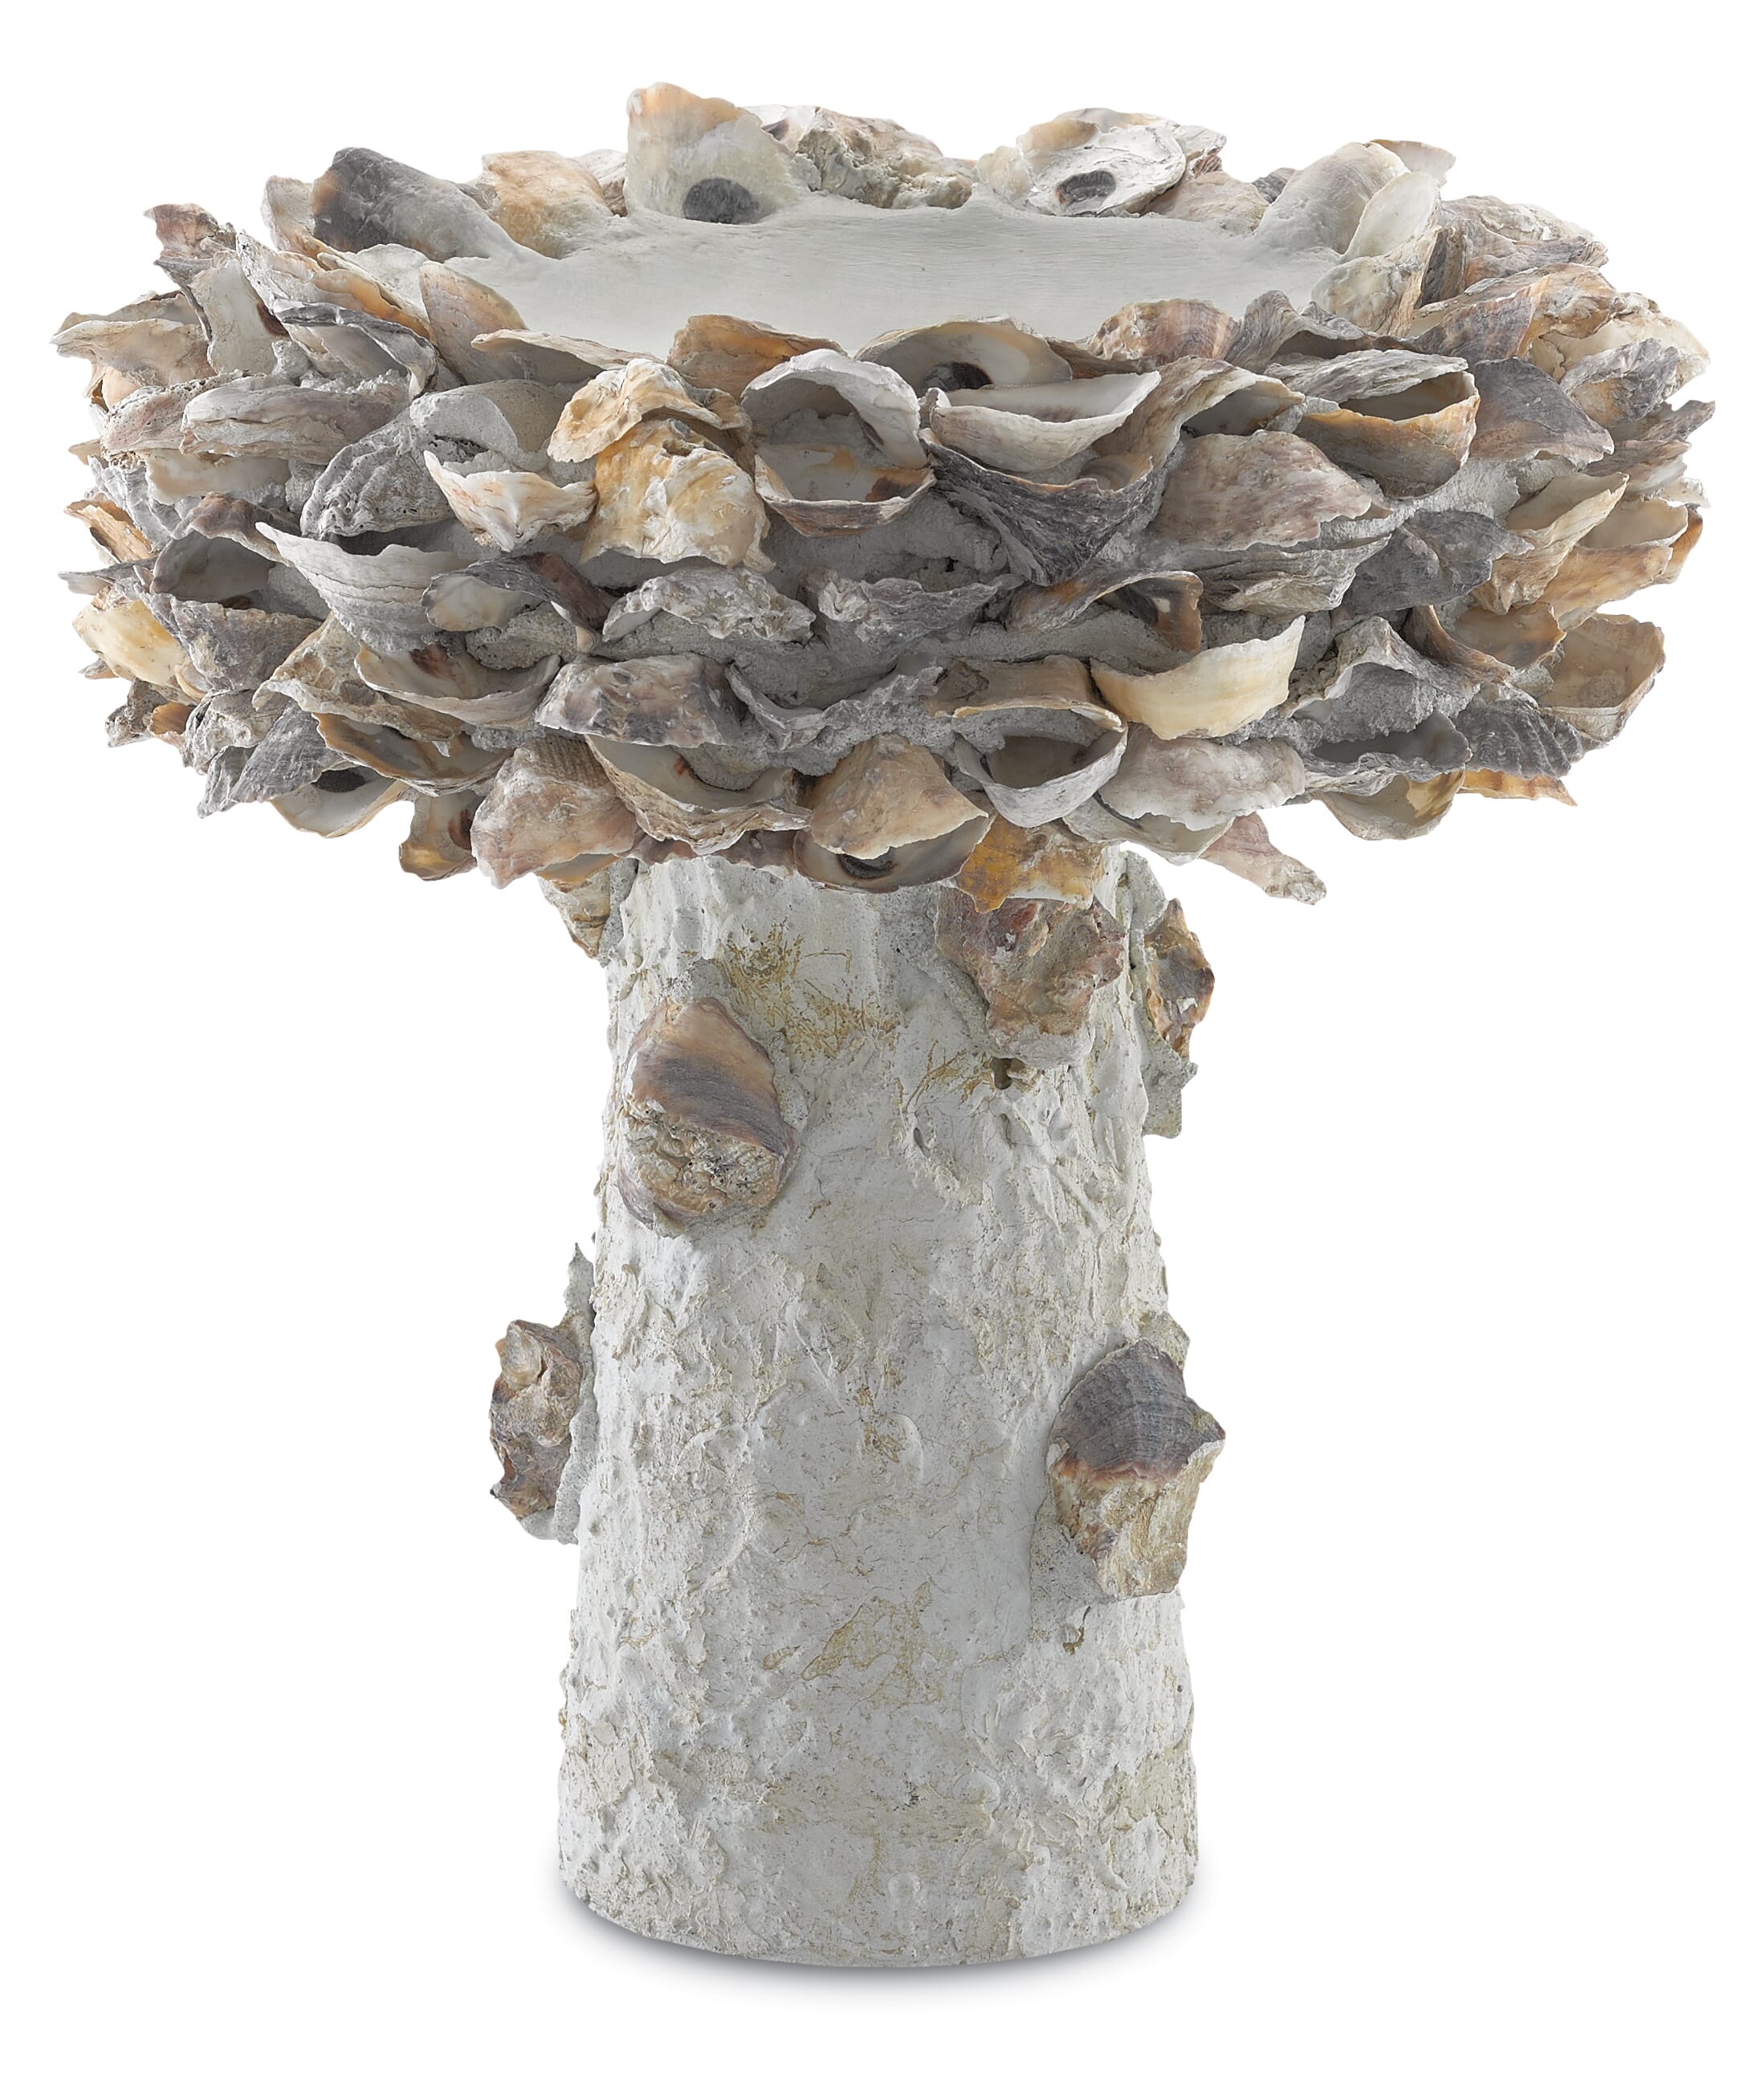 14" Oyster Shell Small Bird Bath in Natural